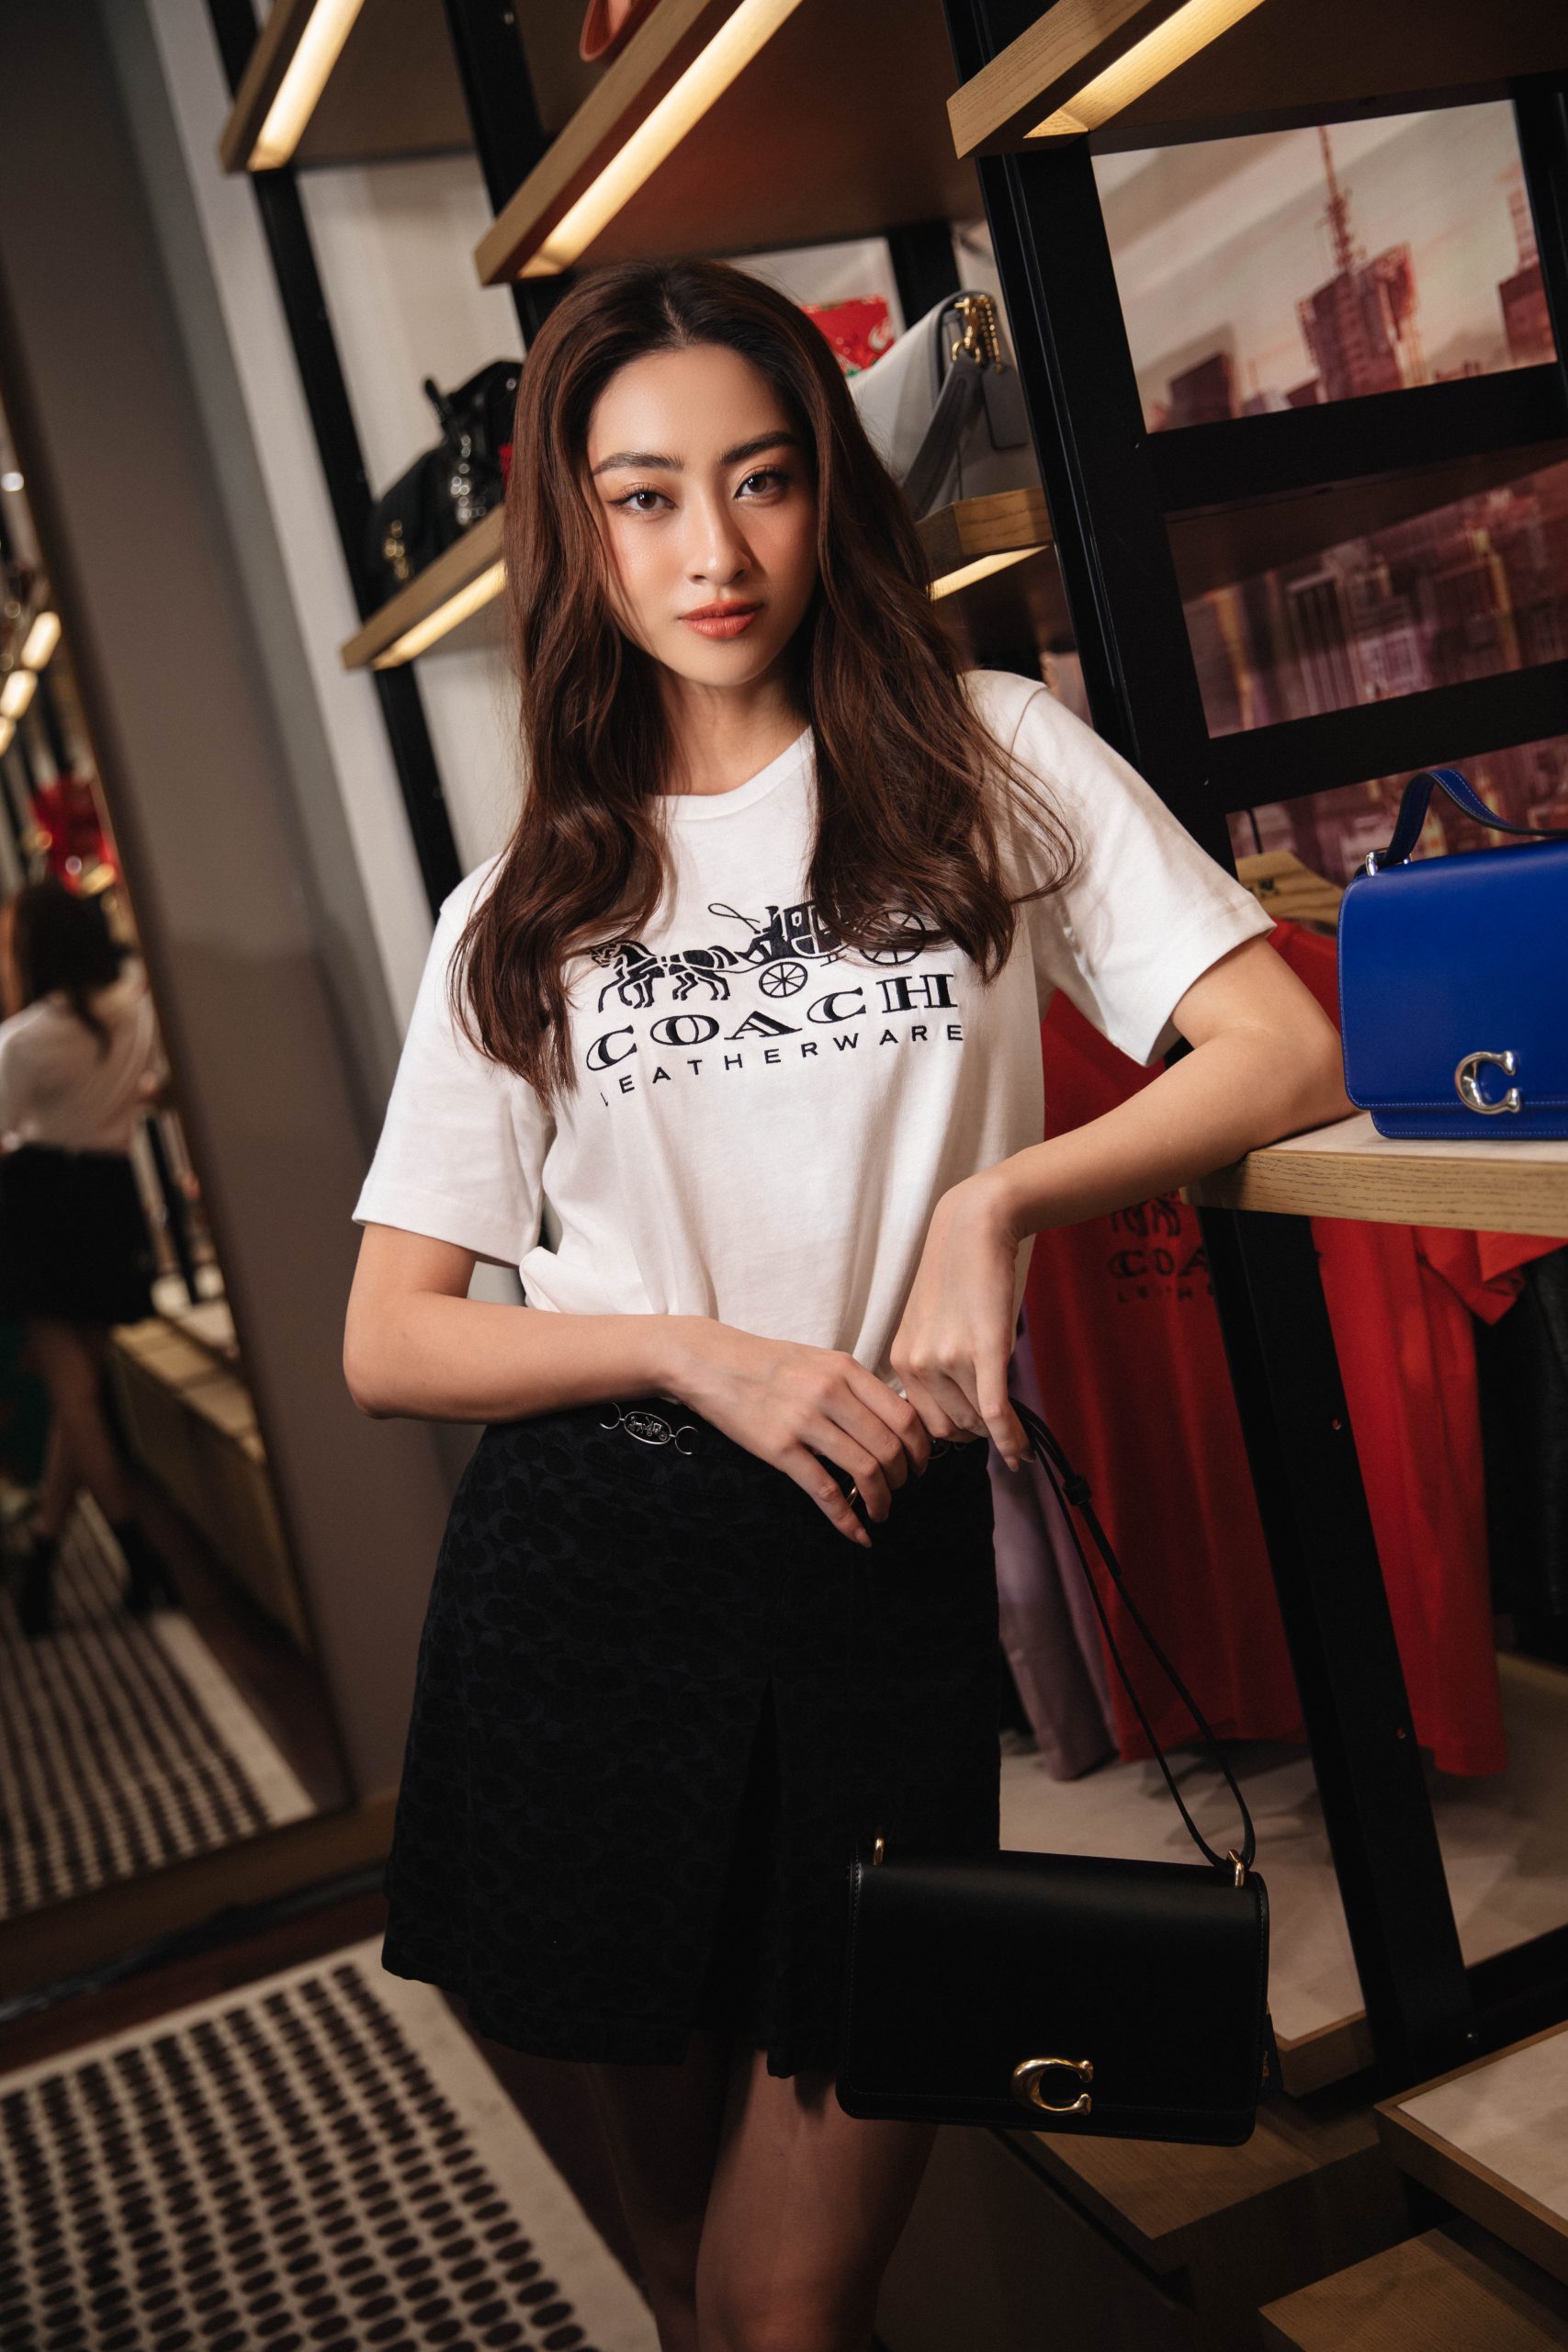 Meanwhile, Miss Luong Thuy Linh with a youthful style when mixing a T-shirt with a characteristic logo and a short skirt showing off her long legs